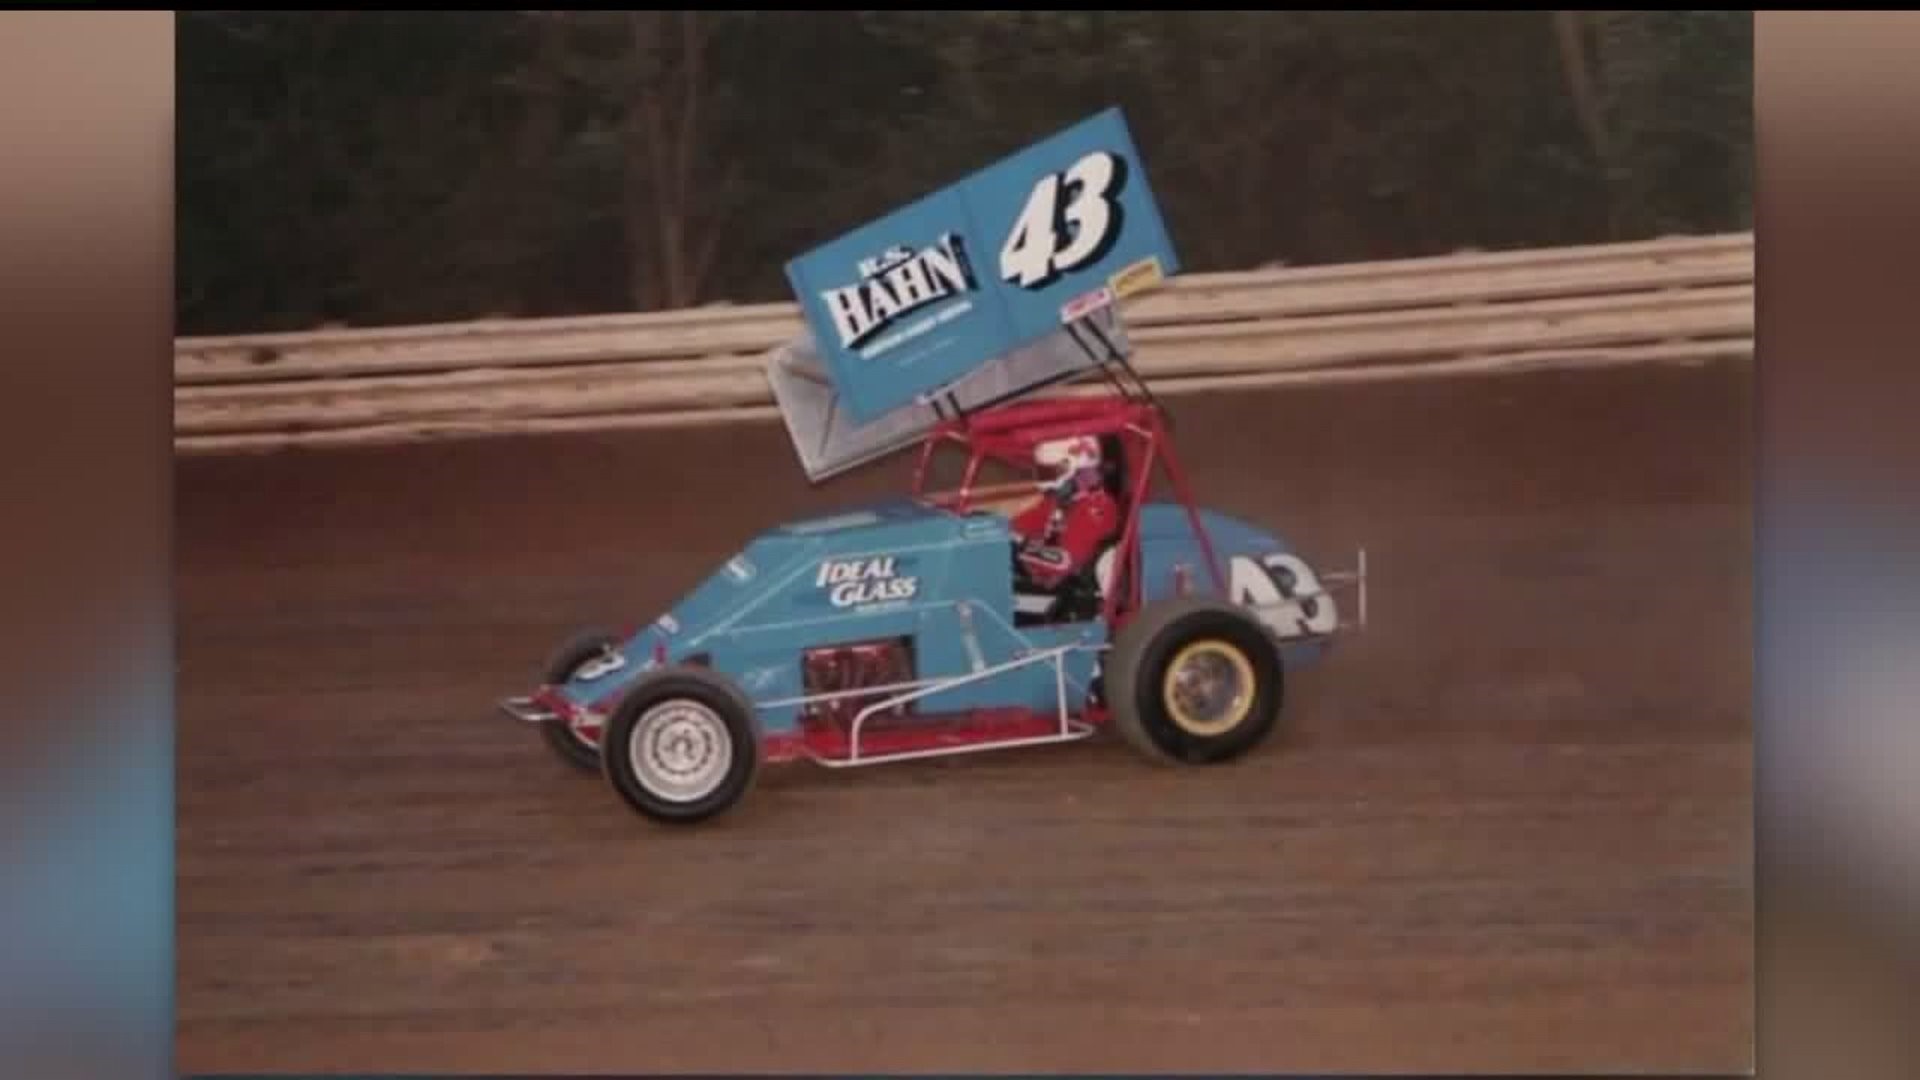 Search for a stole Sprint Car in Dauphin County